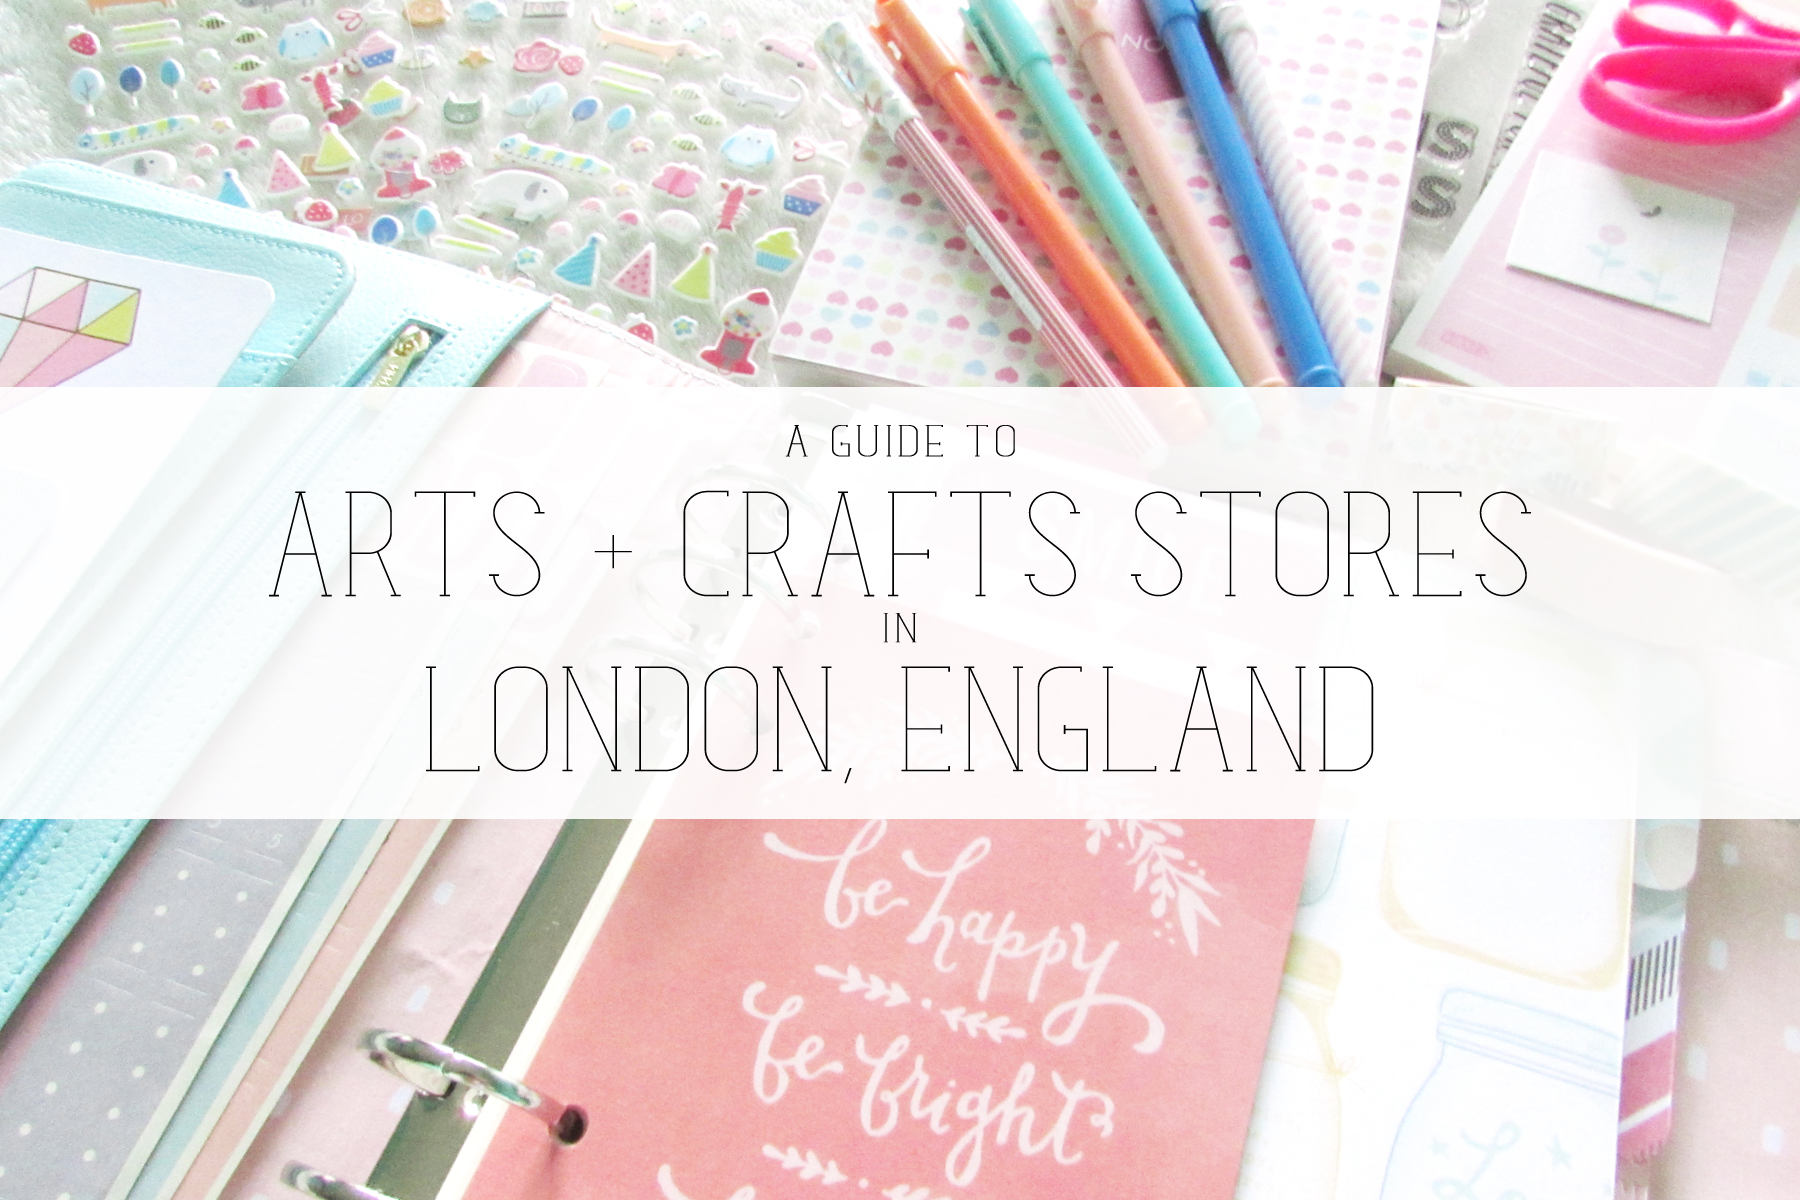 ART And crafts, London